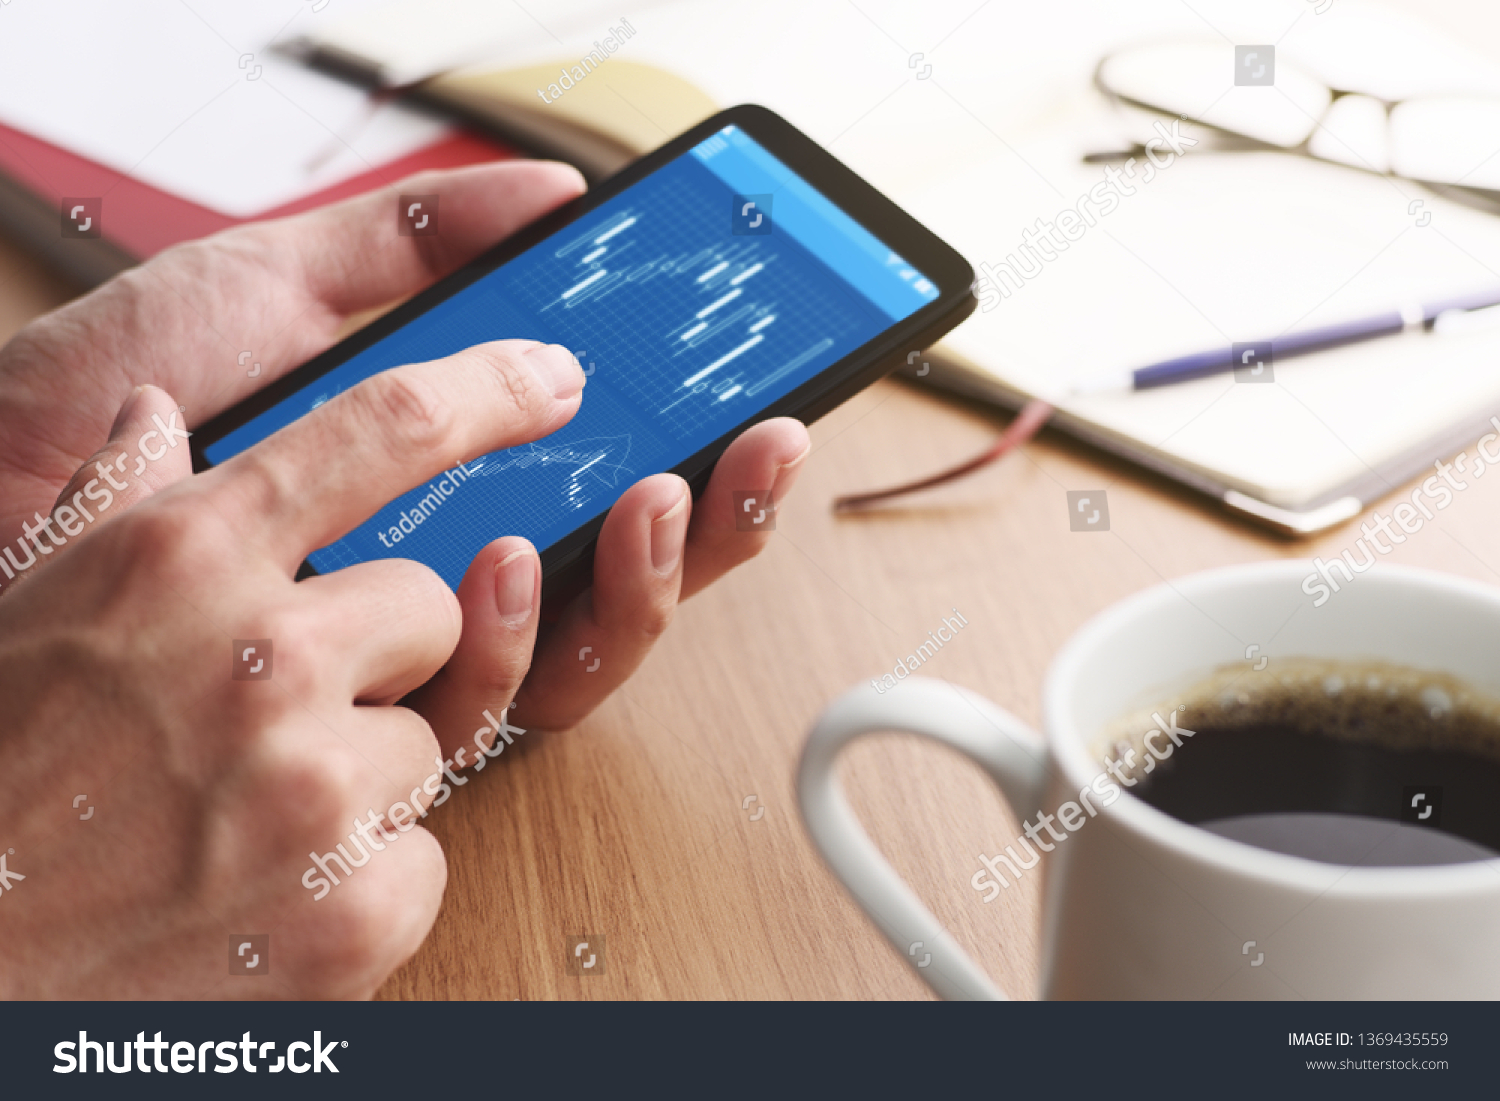 Stock market charts on smartphone screen.
Closeup of male hands holding smartphone. Checking financial market.
 #1369435559